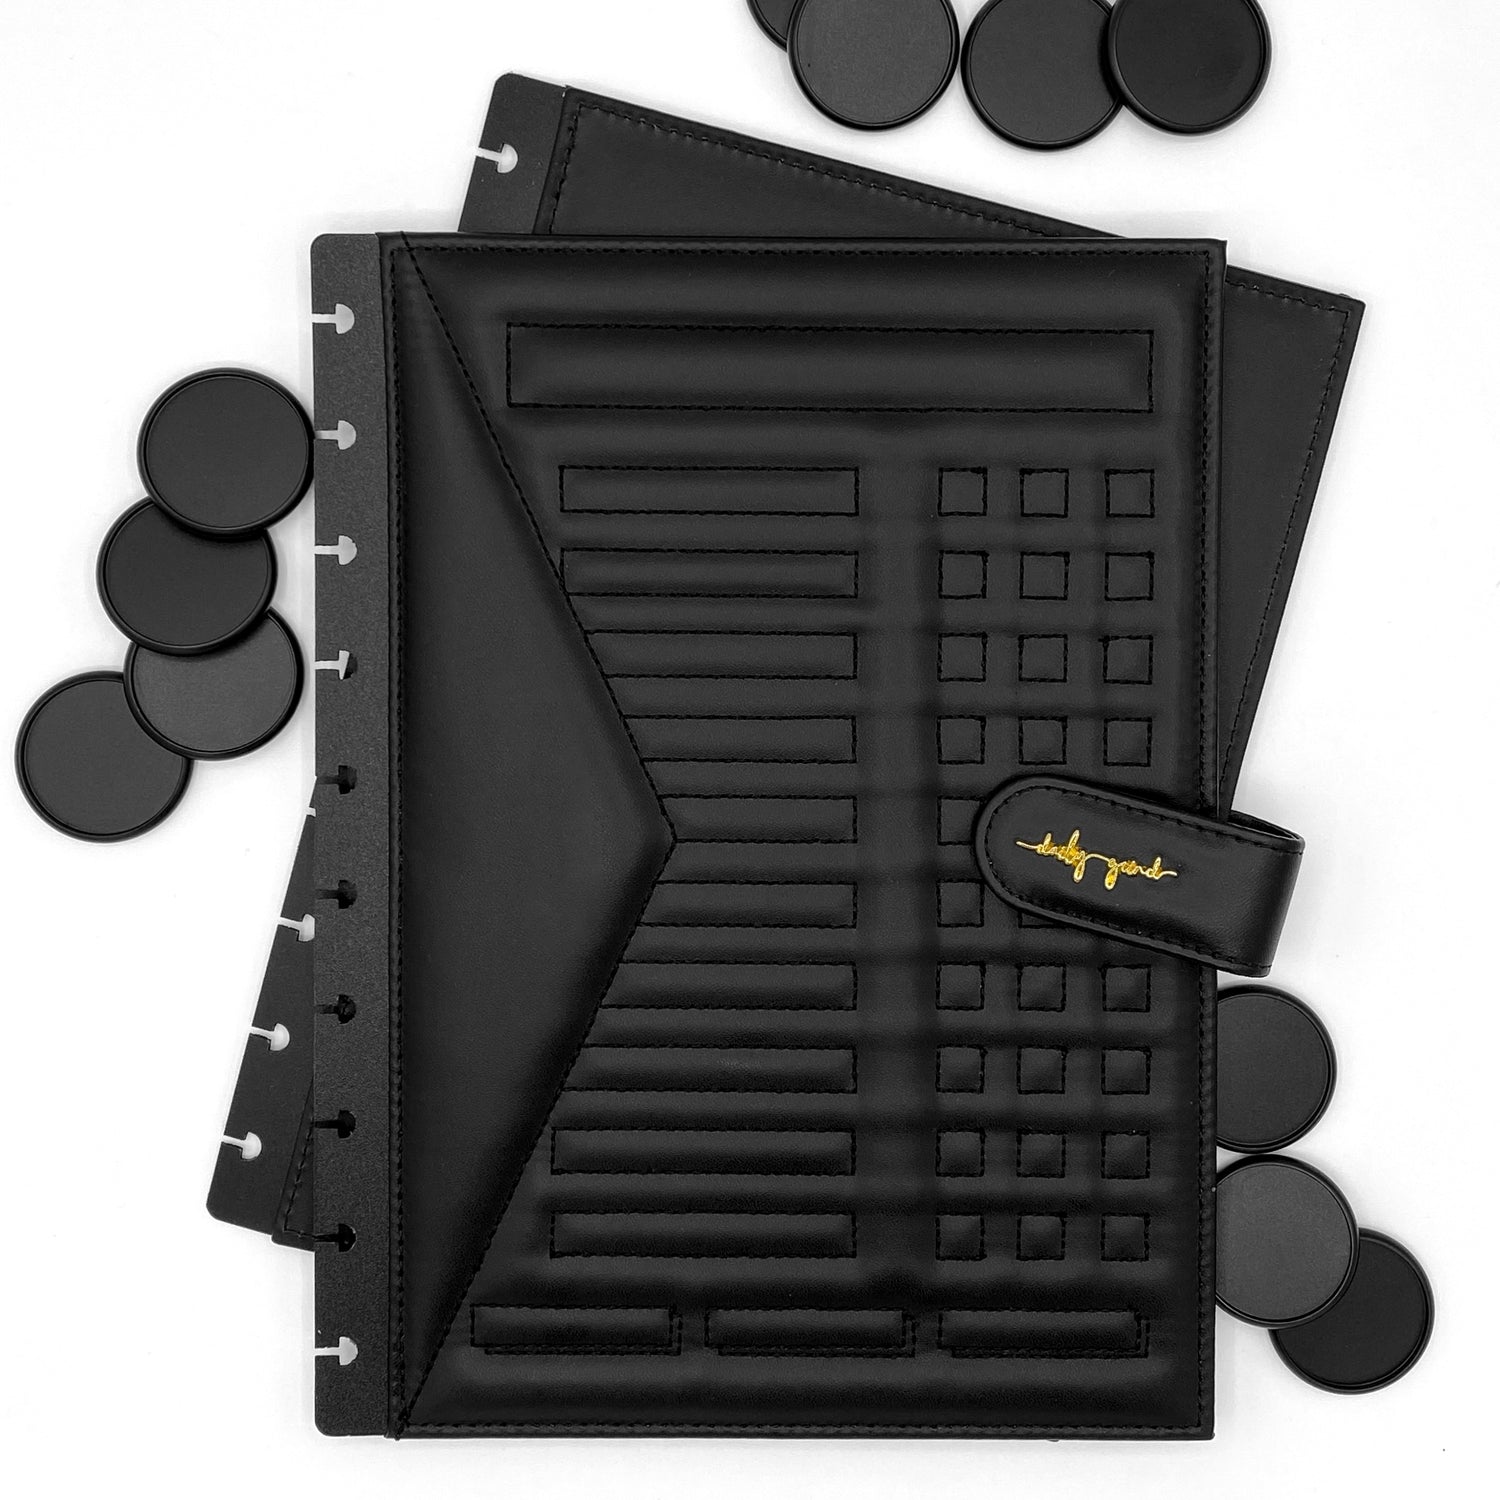 Black faux leather planner covers and black discs